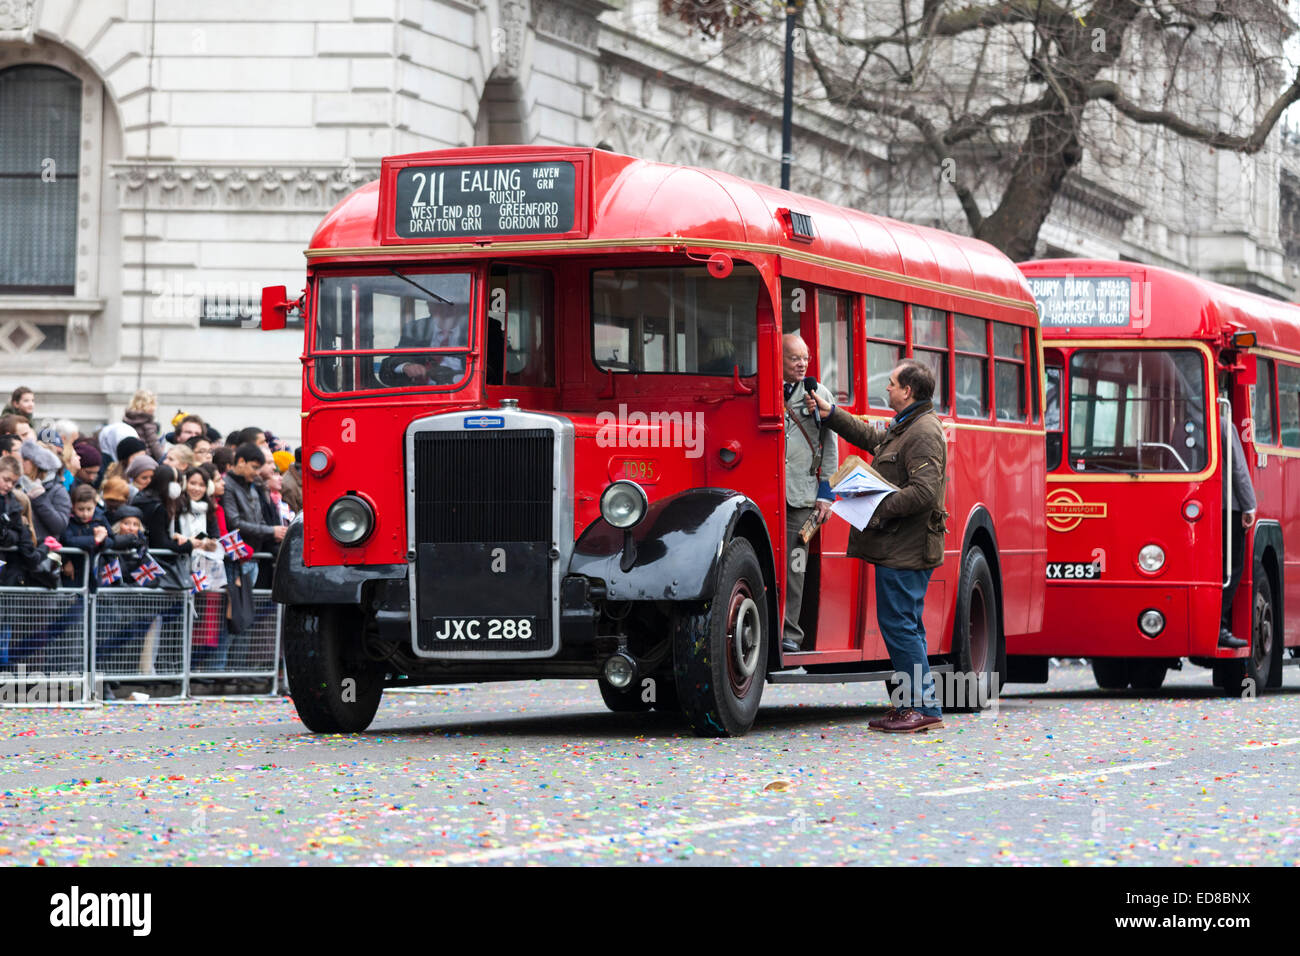 Parade Presenter Jeremy Grittins interviews a participant from London Transport and the London Bus Museum in a historic single decker buses at the London New Year's Day Parade on 1st January 2015. Stock Photo